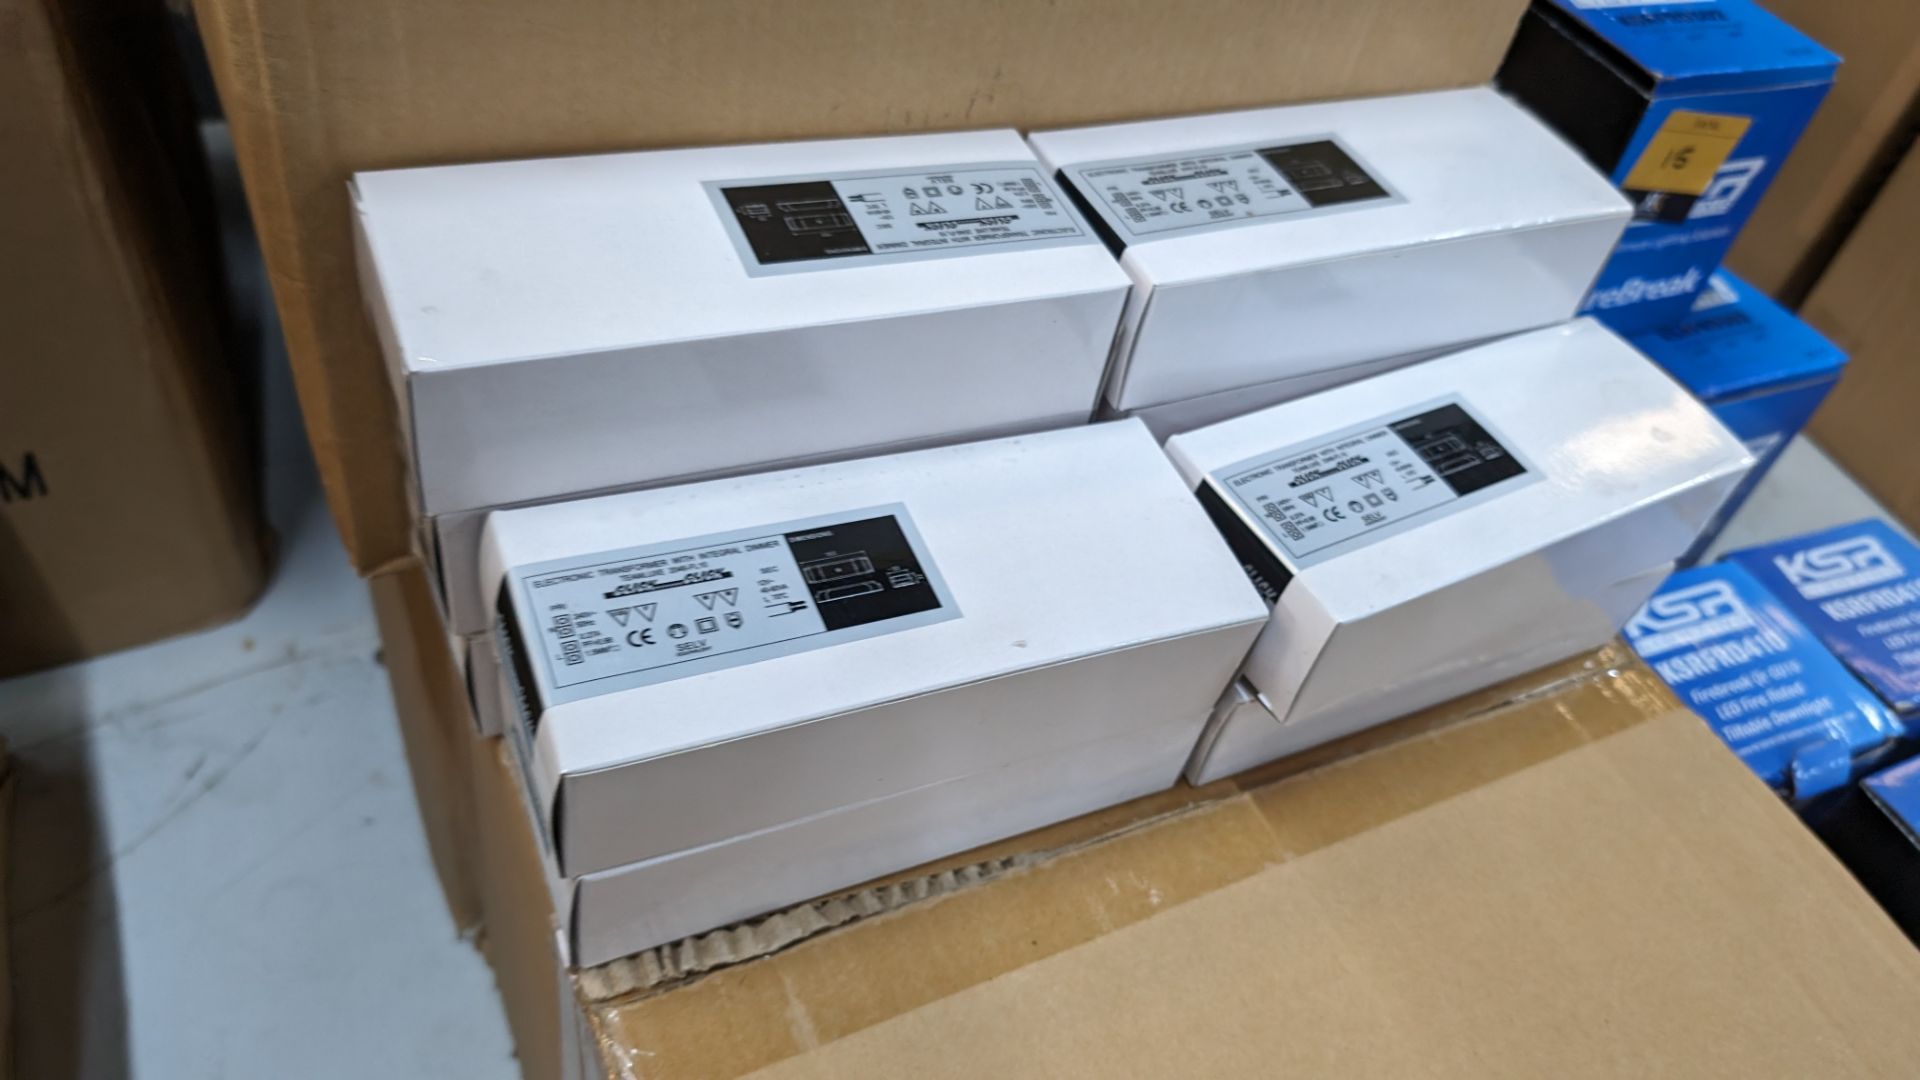 210 off Teamluxe electronic transformers with integral dimmer (5 boxes plus 10 loose transformers) - Bild 3 aus 5